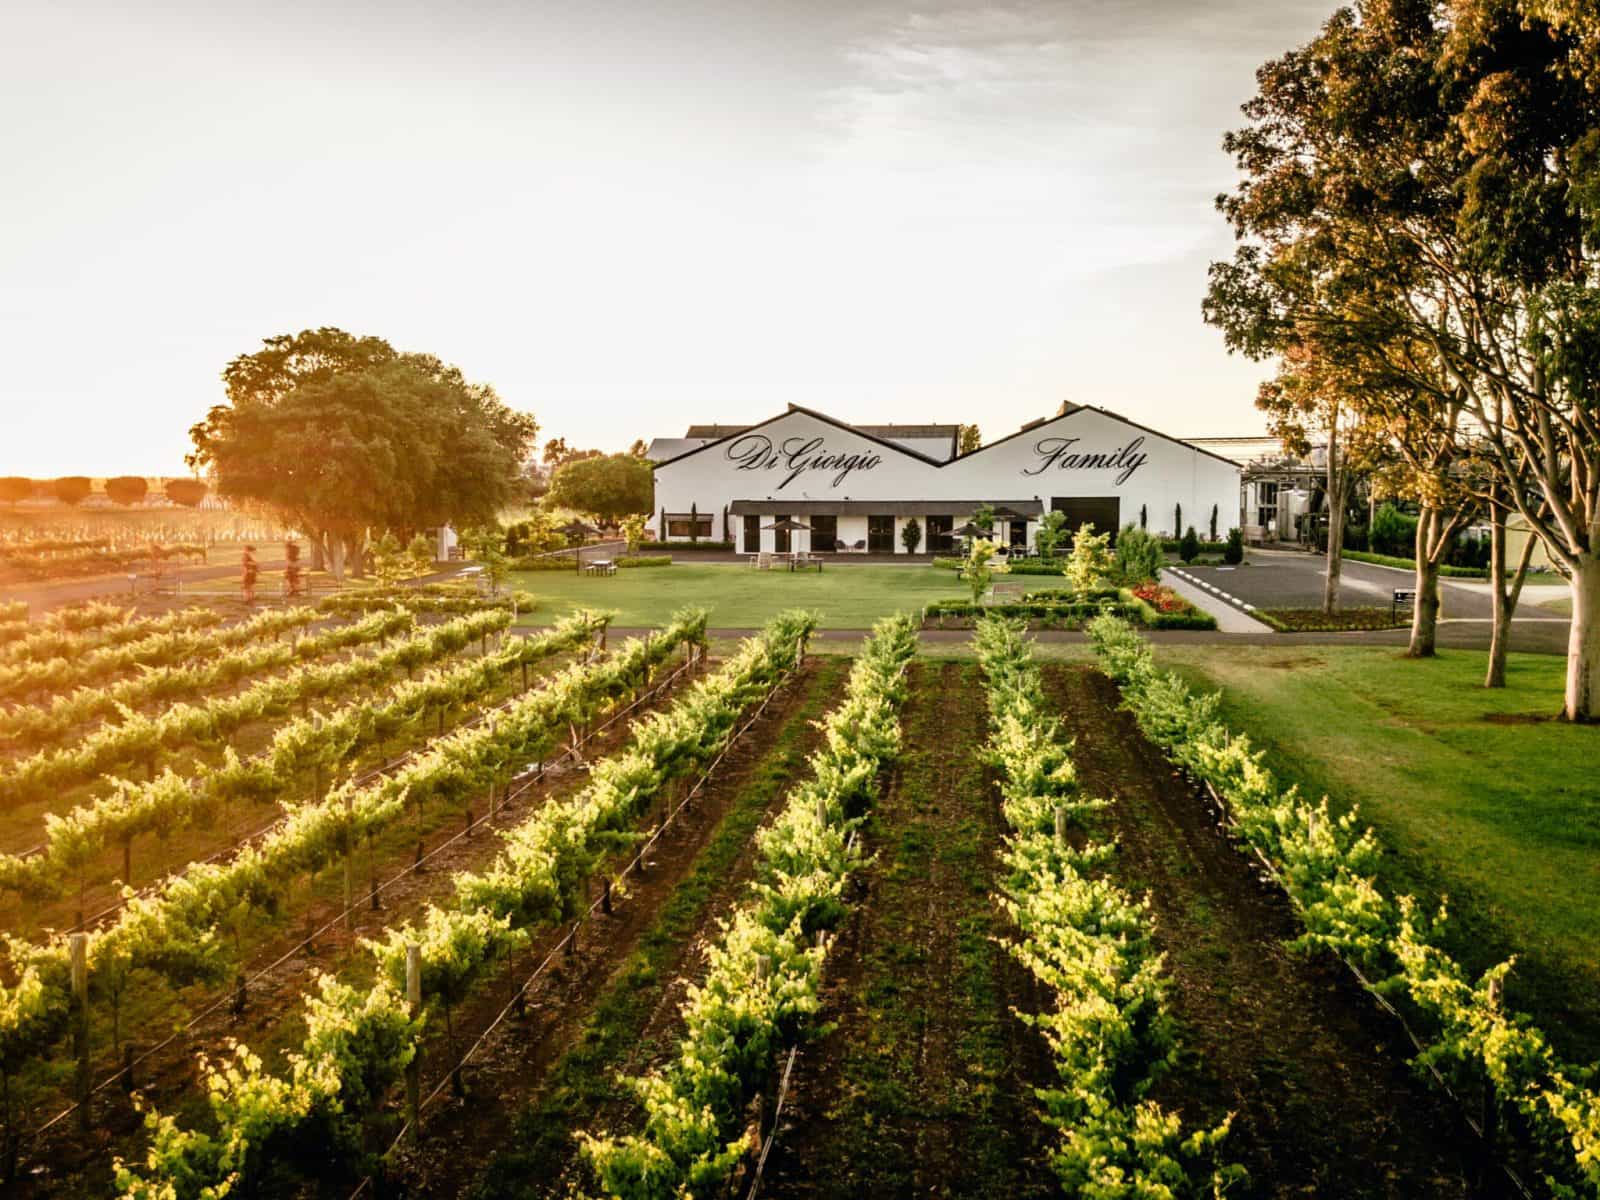 The winery and cellar door right in the heart of Coonawarra